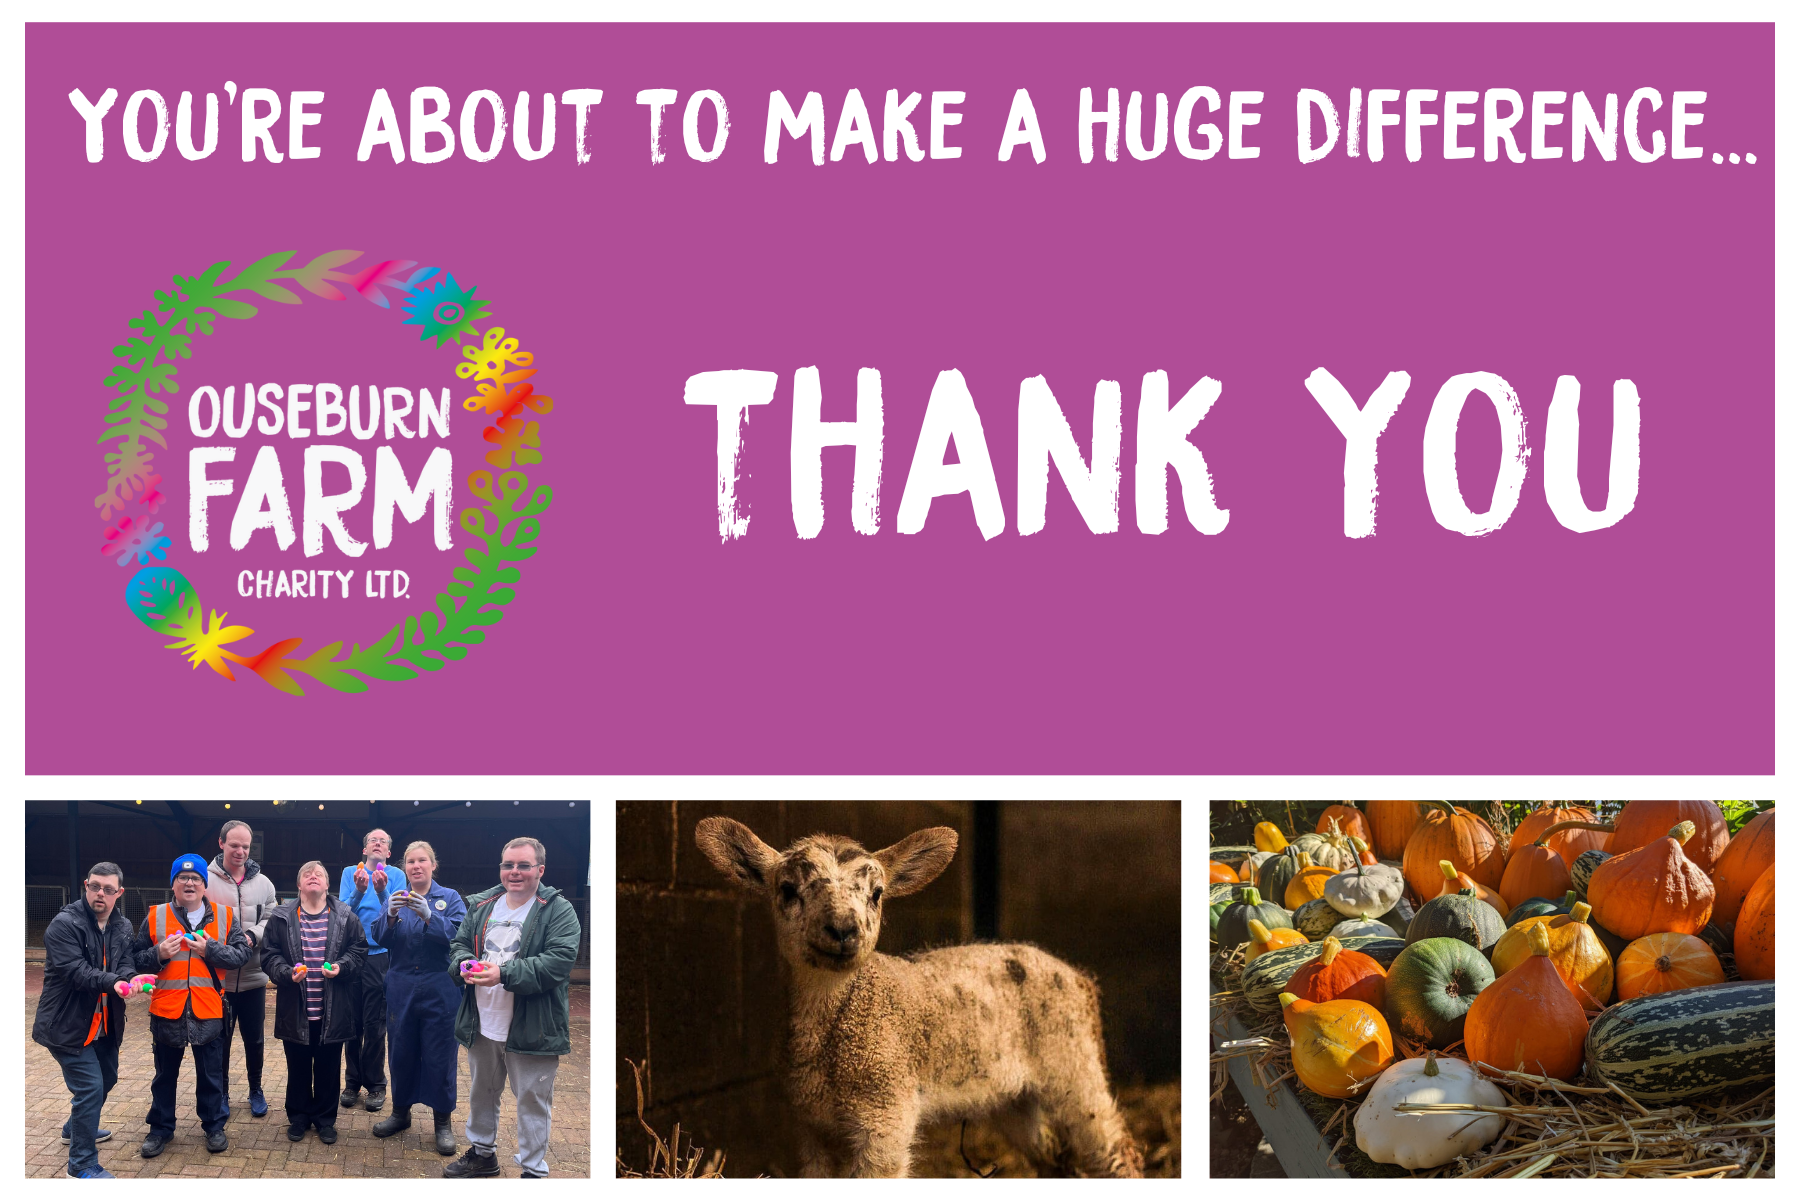 Image says 'You're about to make a huge difference - thank you' alongside the Ouseburn Farm logo and some photos of our Placements and volunteers in the farmyard, a lamb and some orange pumpkins